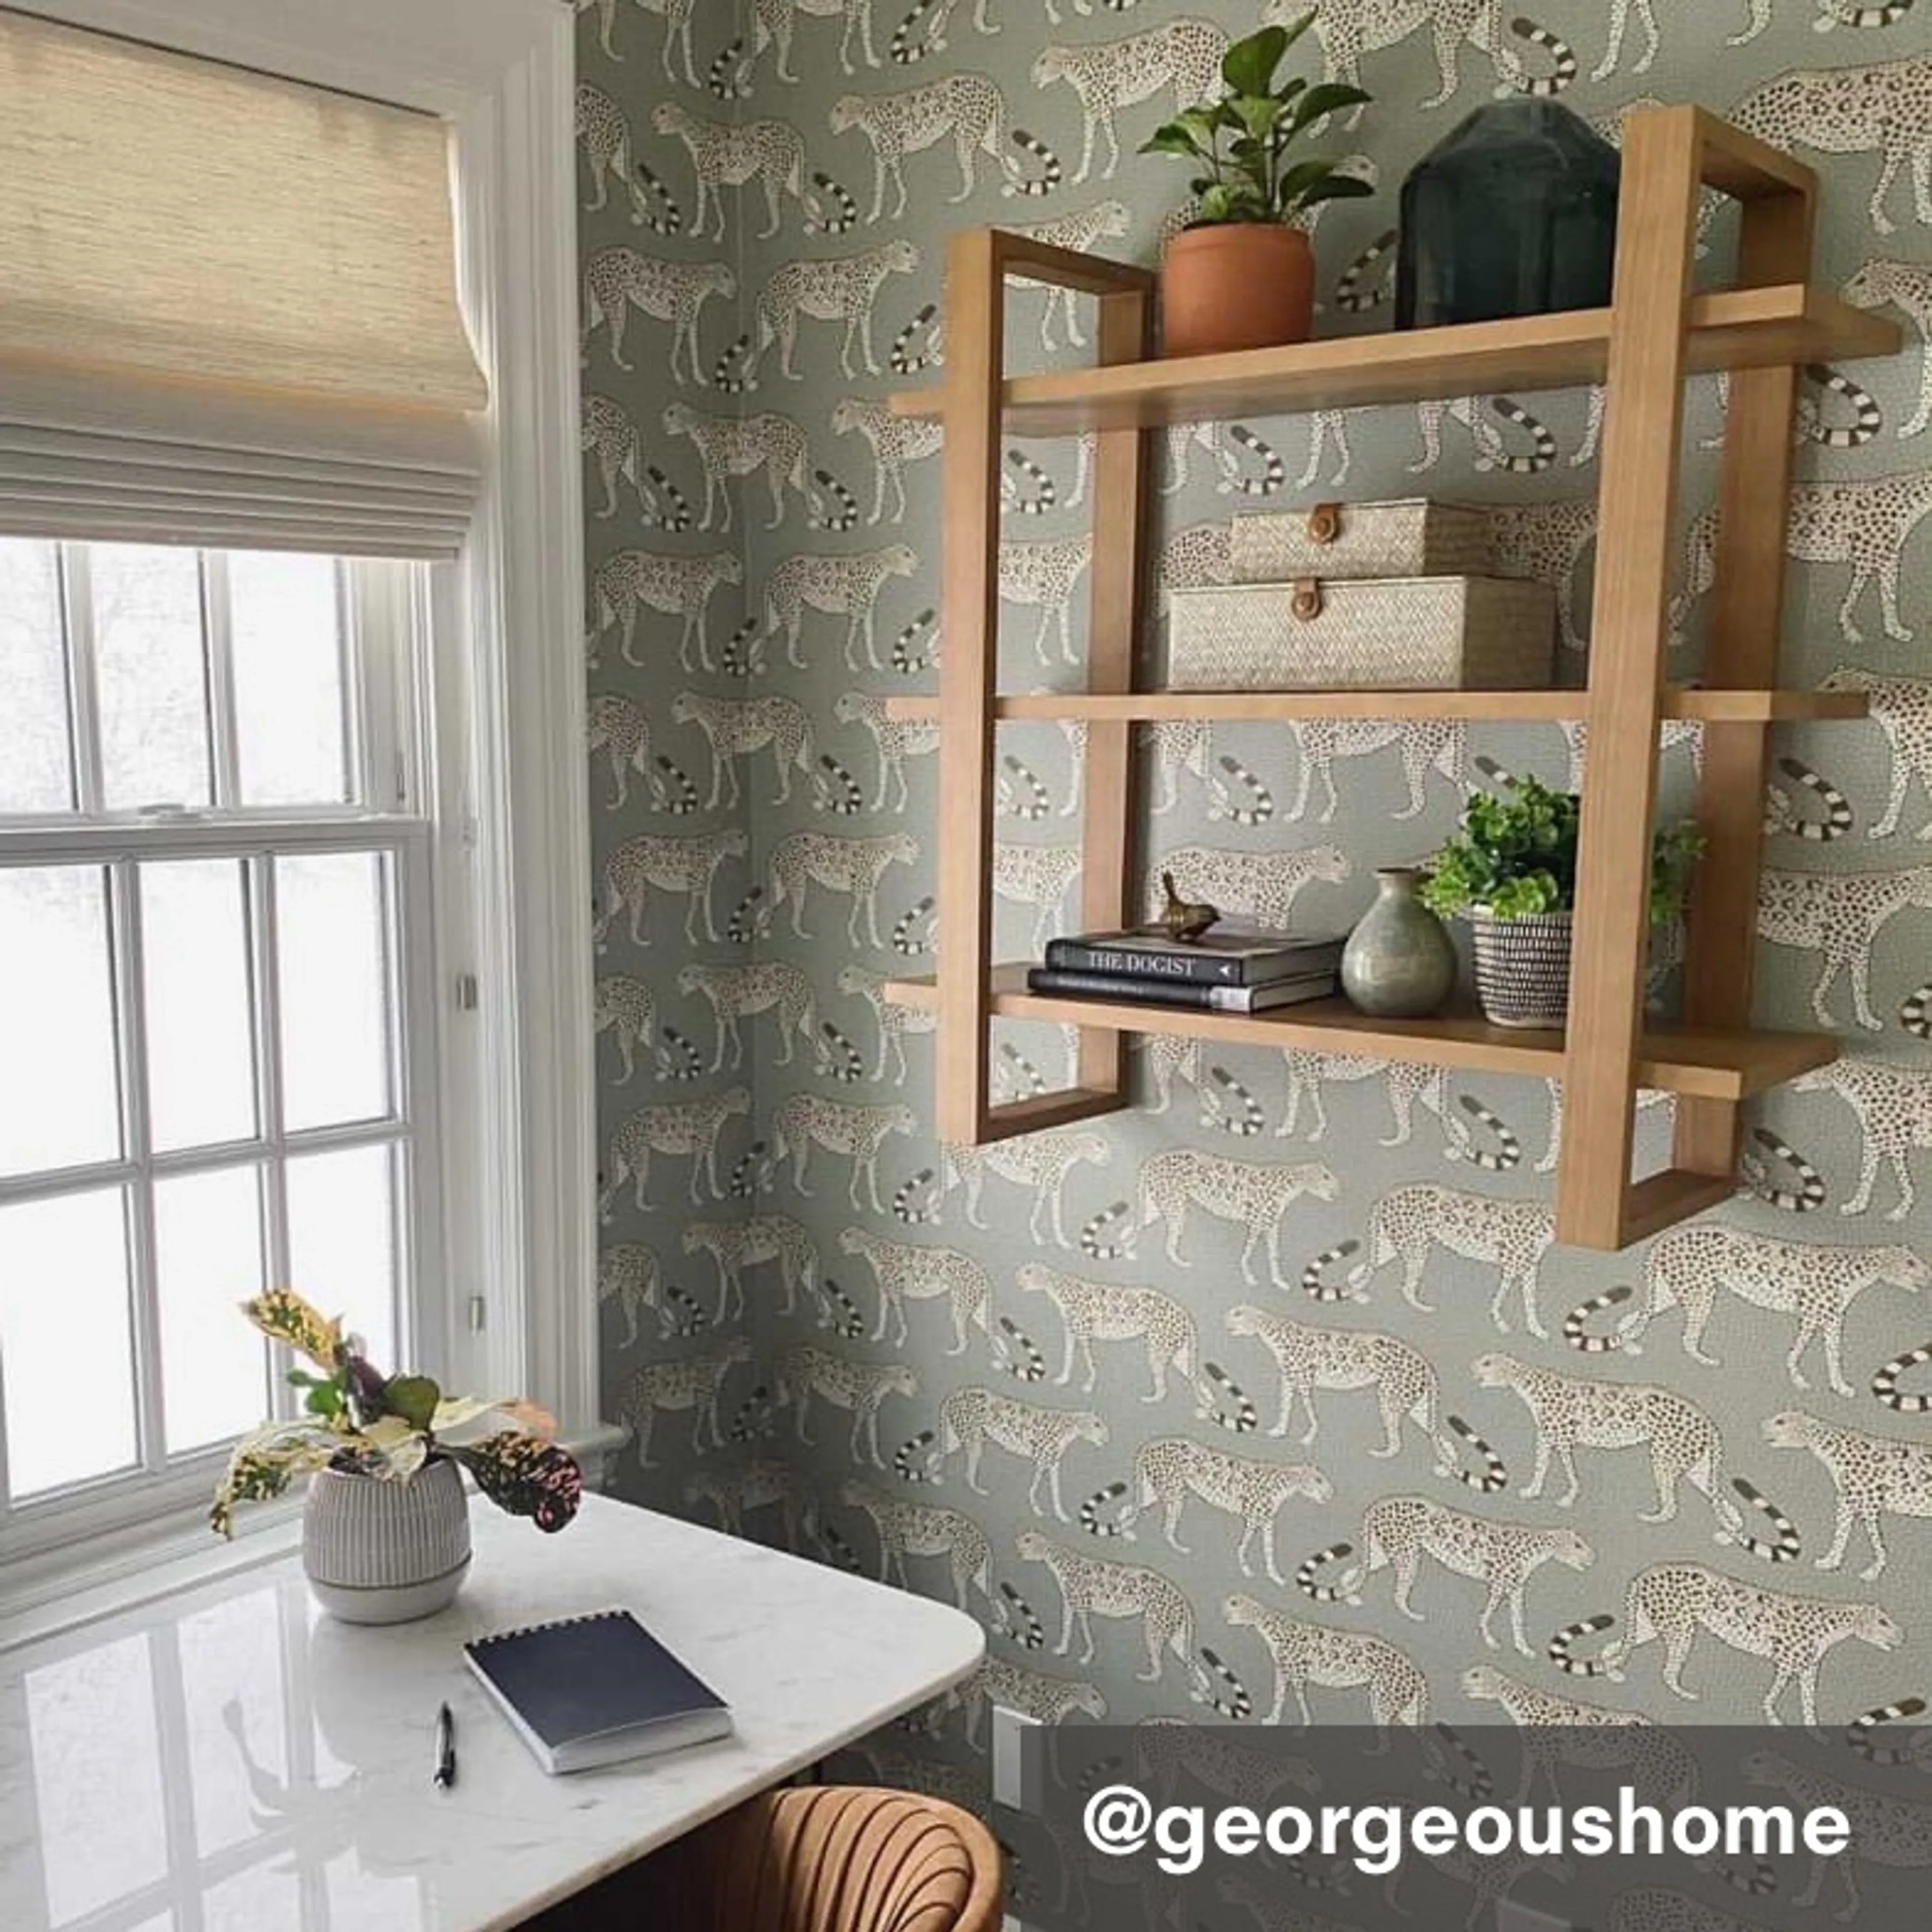 Index Wall Shelf from @georgeoushome